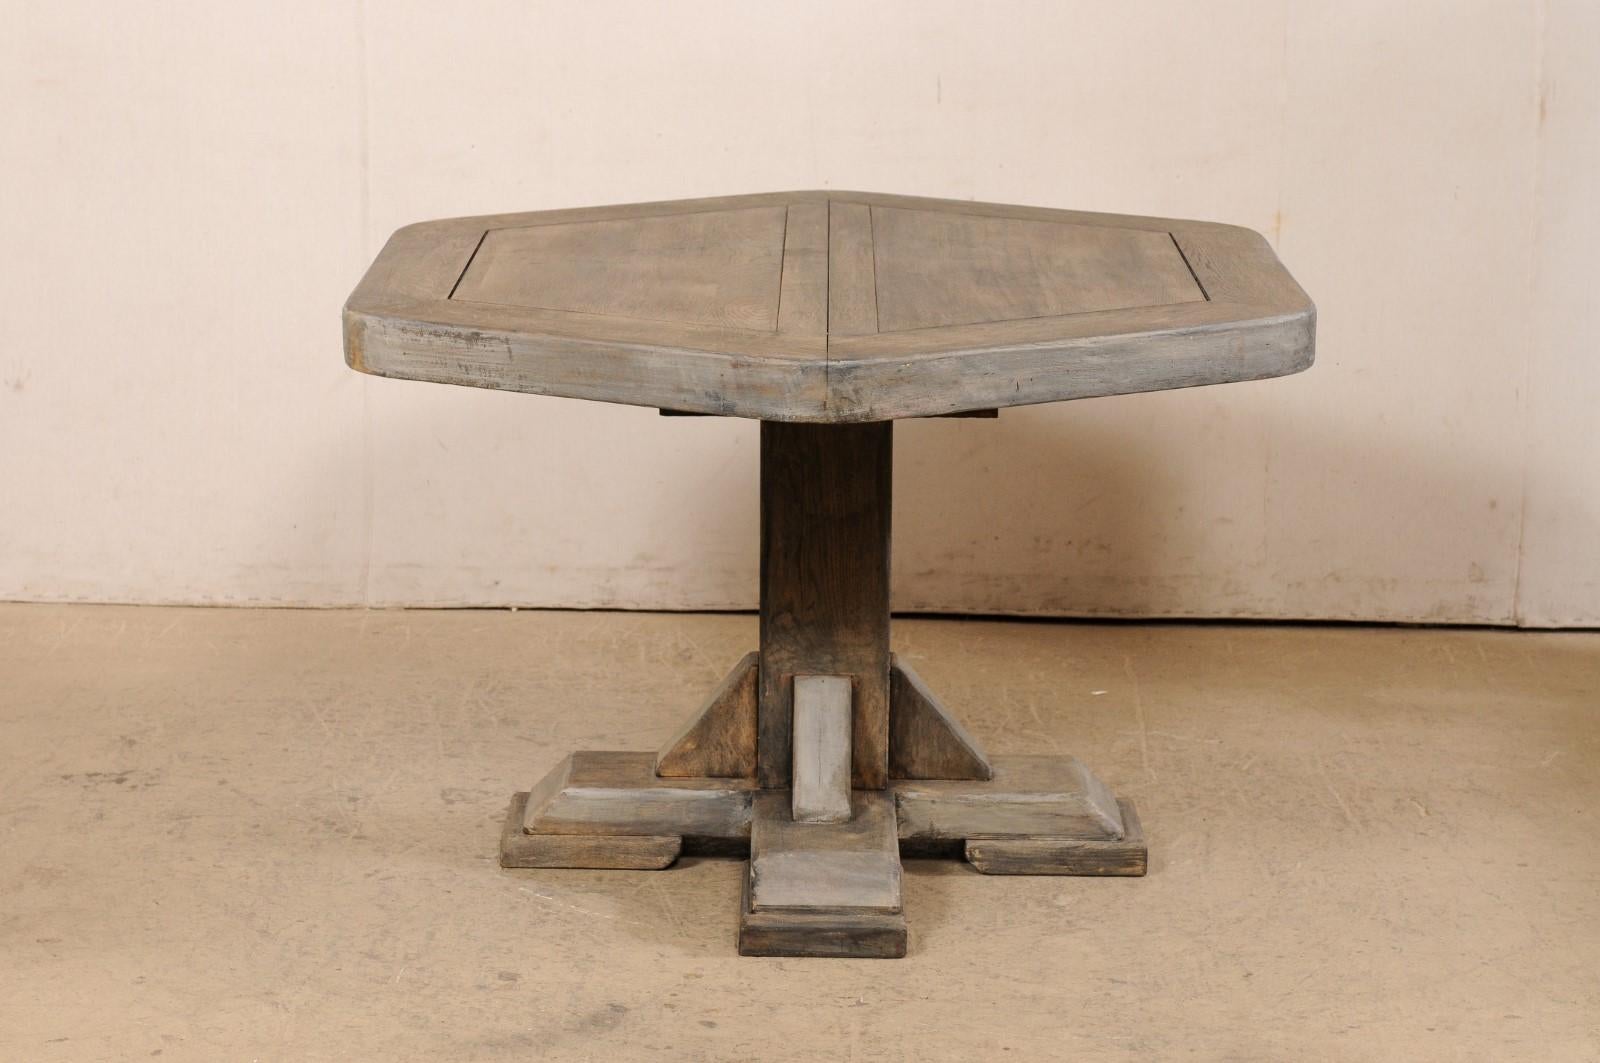 European Hexagon-Shaped Wooden Pedestal Table, Mid 20th century For Sale 1